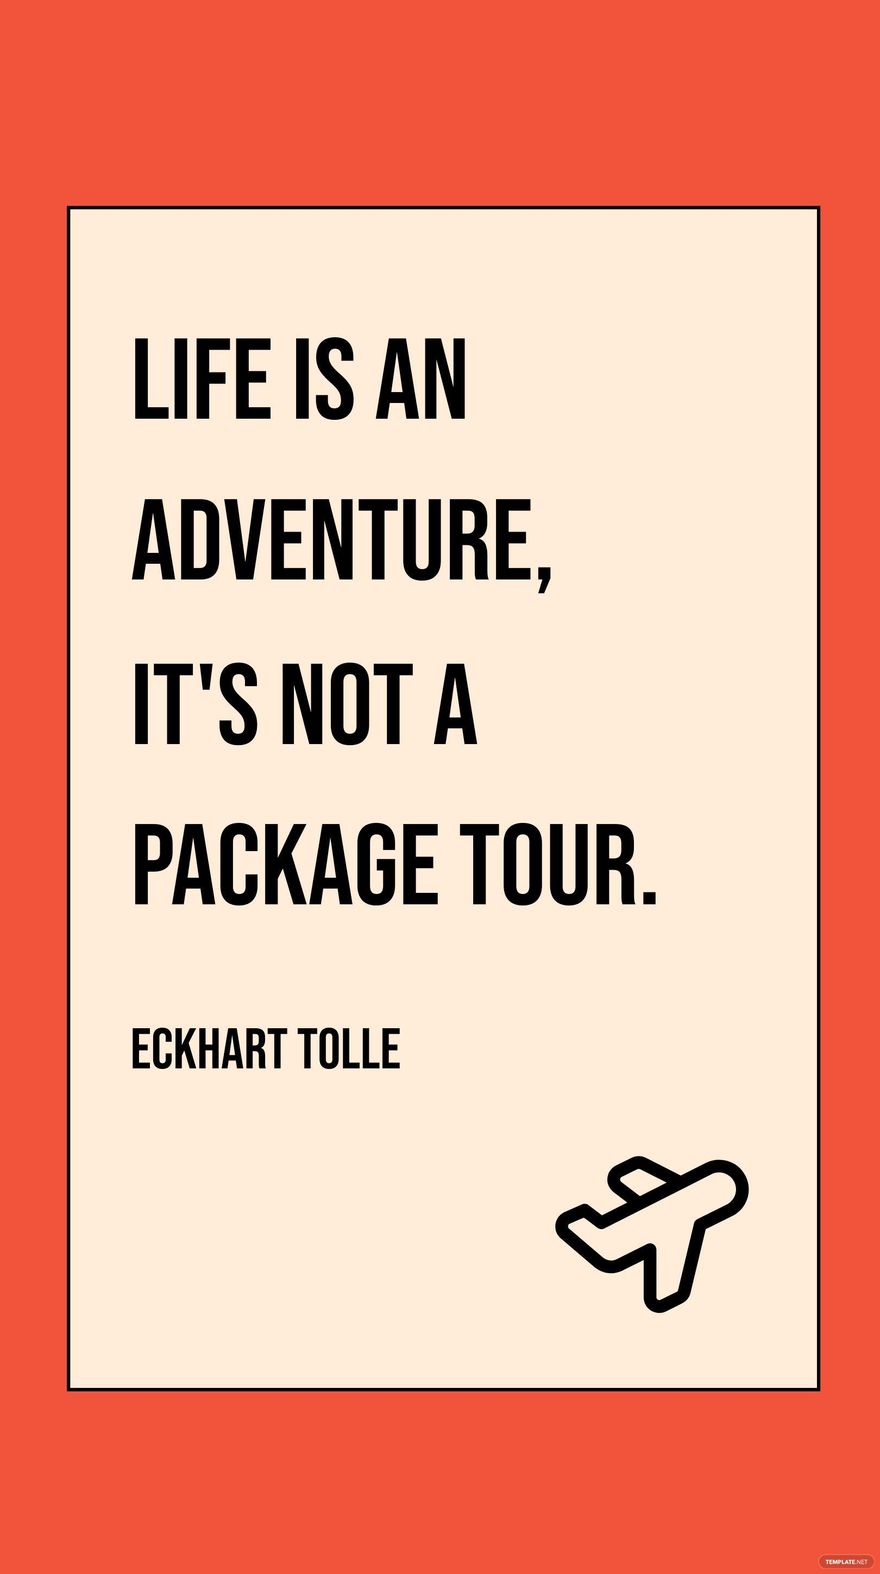 Free Eckhart Tolle -Life is an adventure, it's not a package tour. in JPG